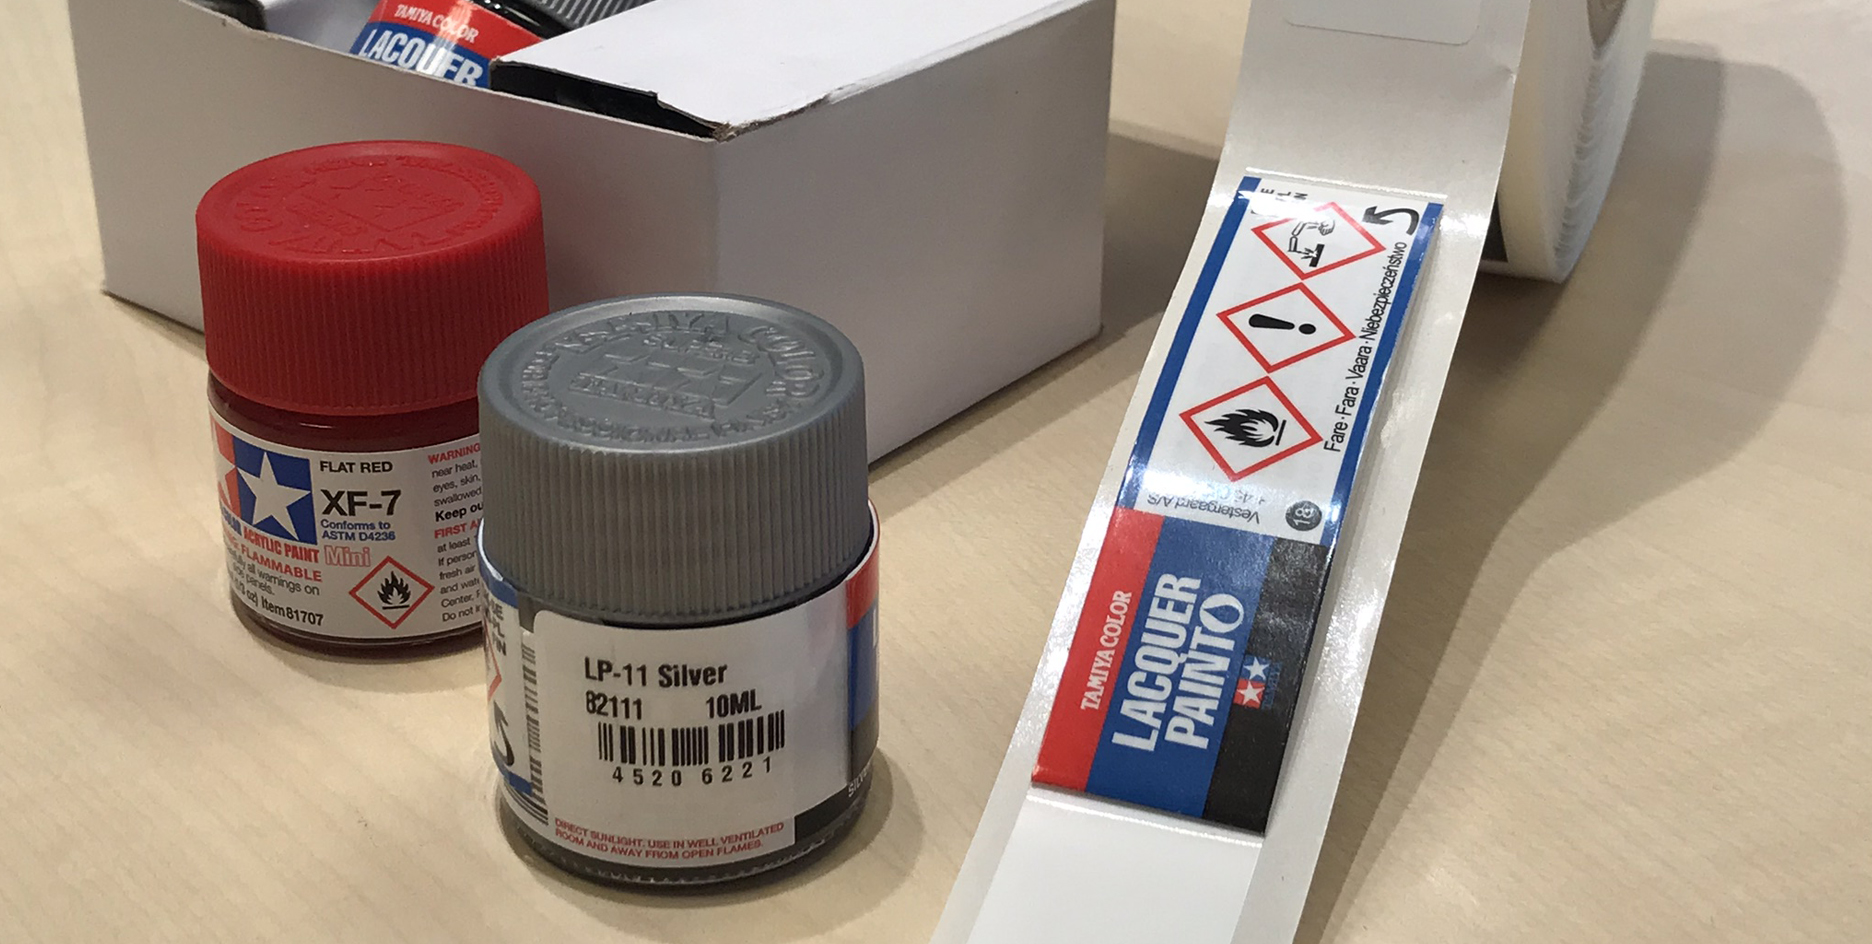 How do I apply the label on a cylindrical, small container